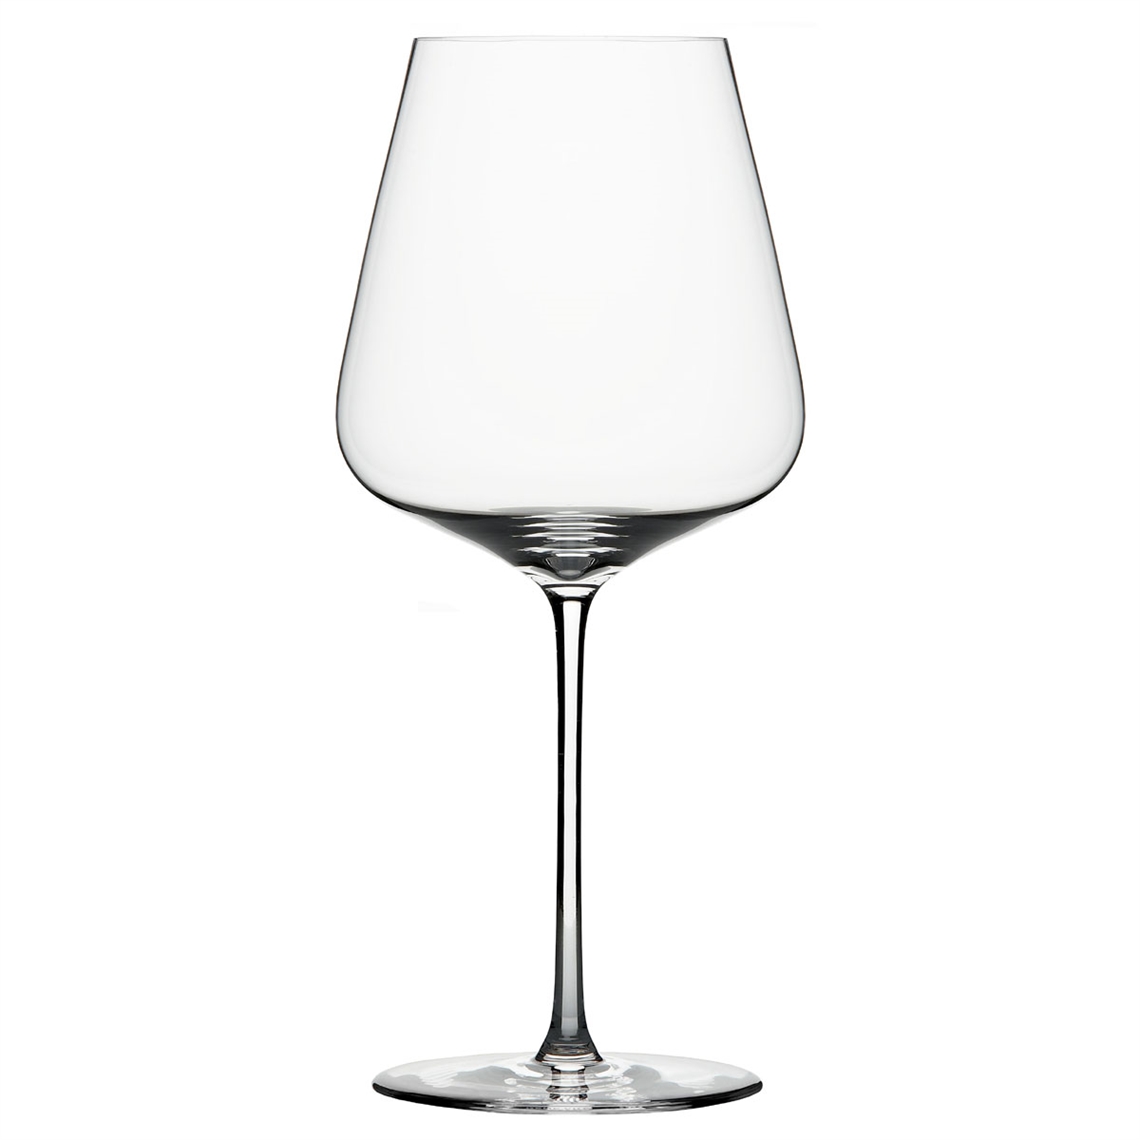 View more riedel vinum from our Premium Mouth Blown Glassware range